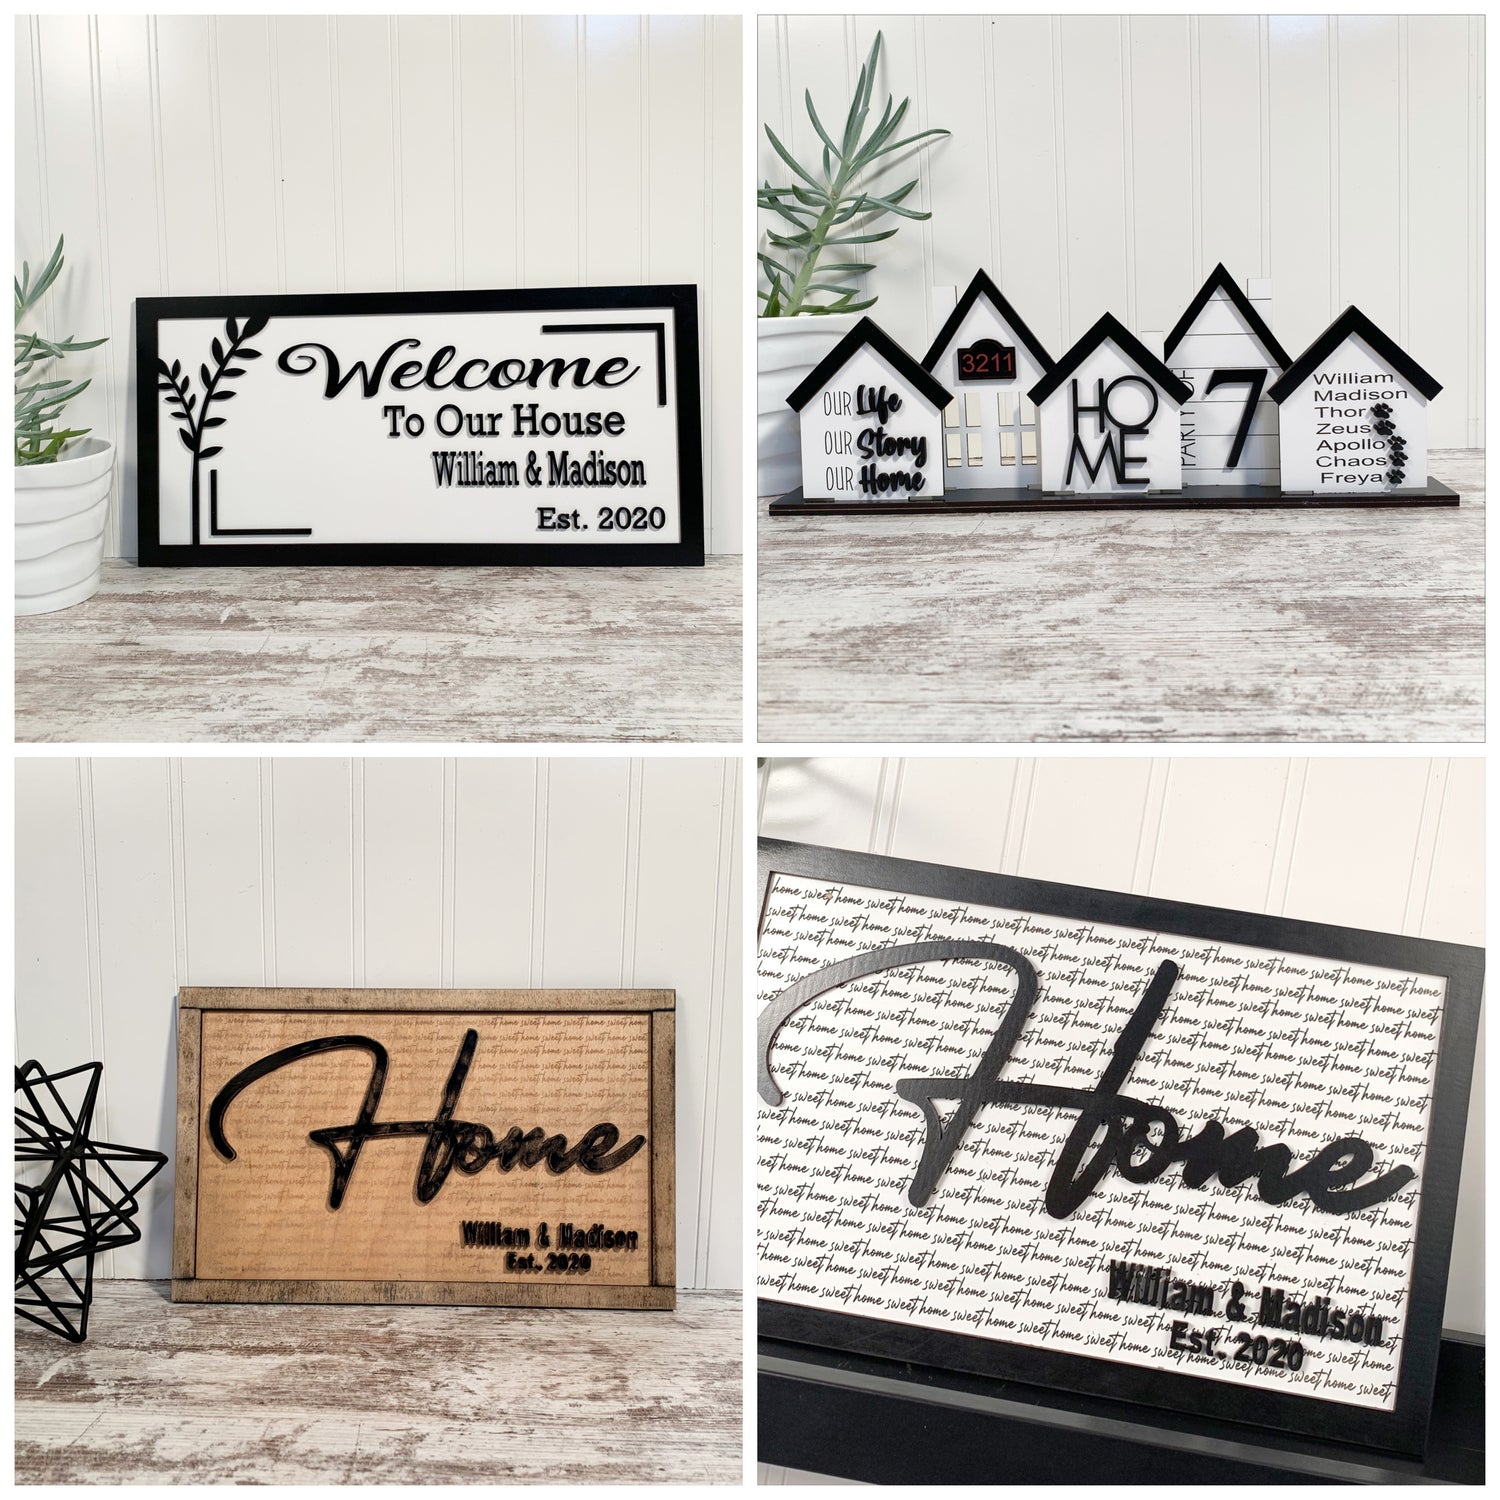 Sign / Home Decor | Farmhouse Style / House warming gift / wedding gifts / handmade / Personalized signage / wood sign / wall art /